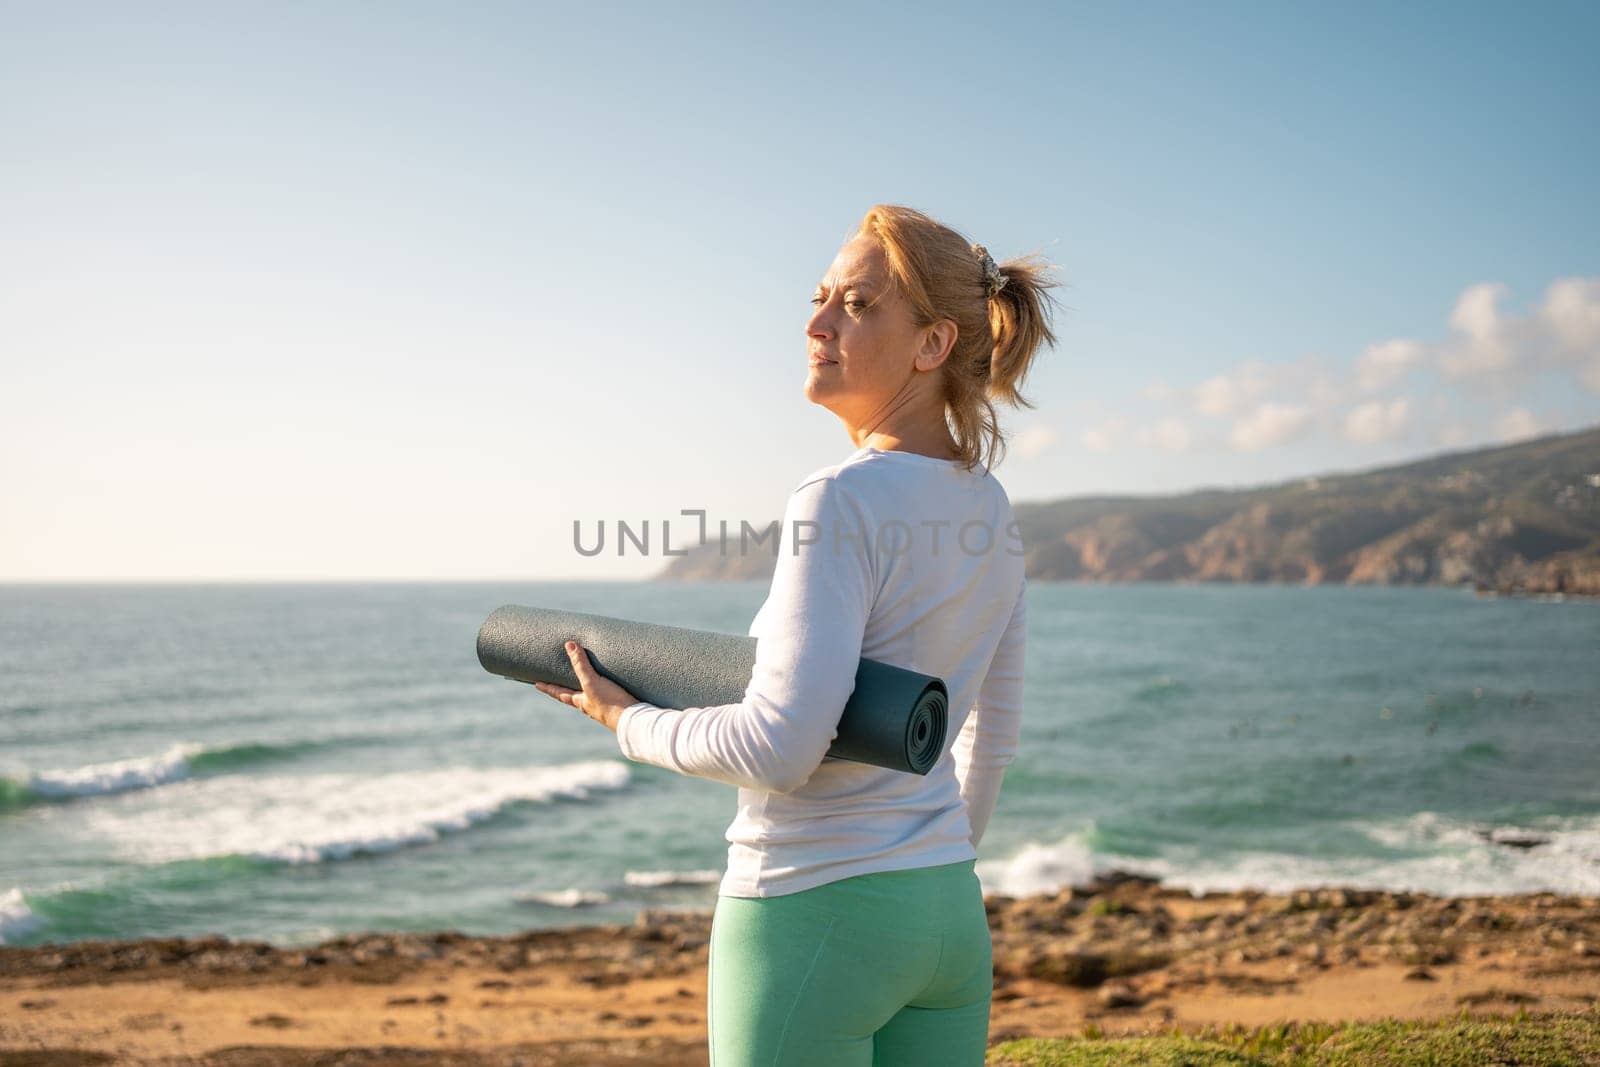 Senior woman standing ocean shore, holding yoga mat. She appears to be happy and enjoying the scenic views before her yoga session. This depicts a harmonious and healthy senior lifestyle concept.